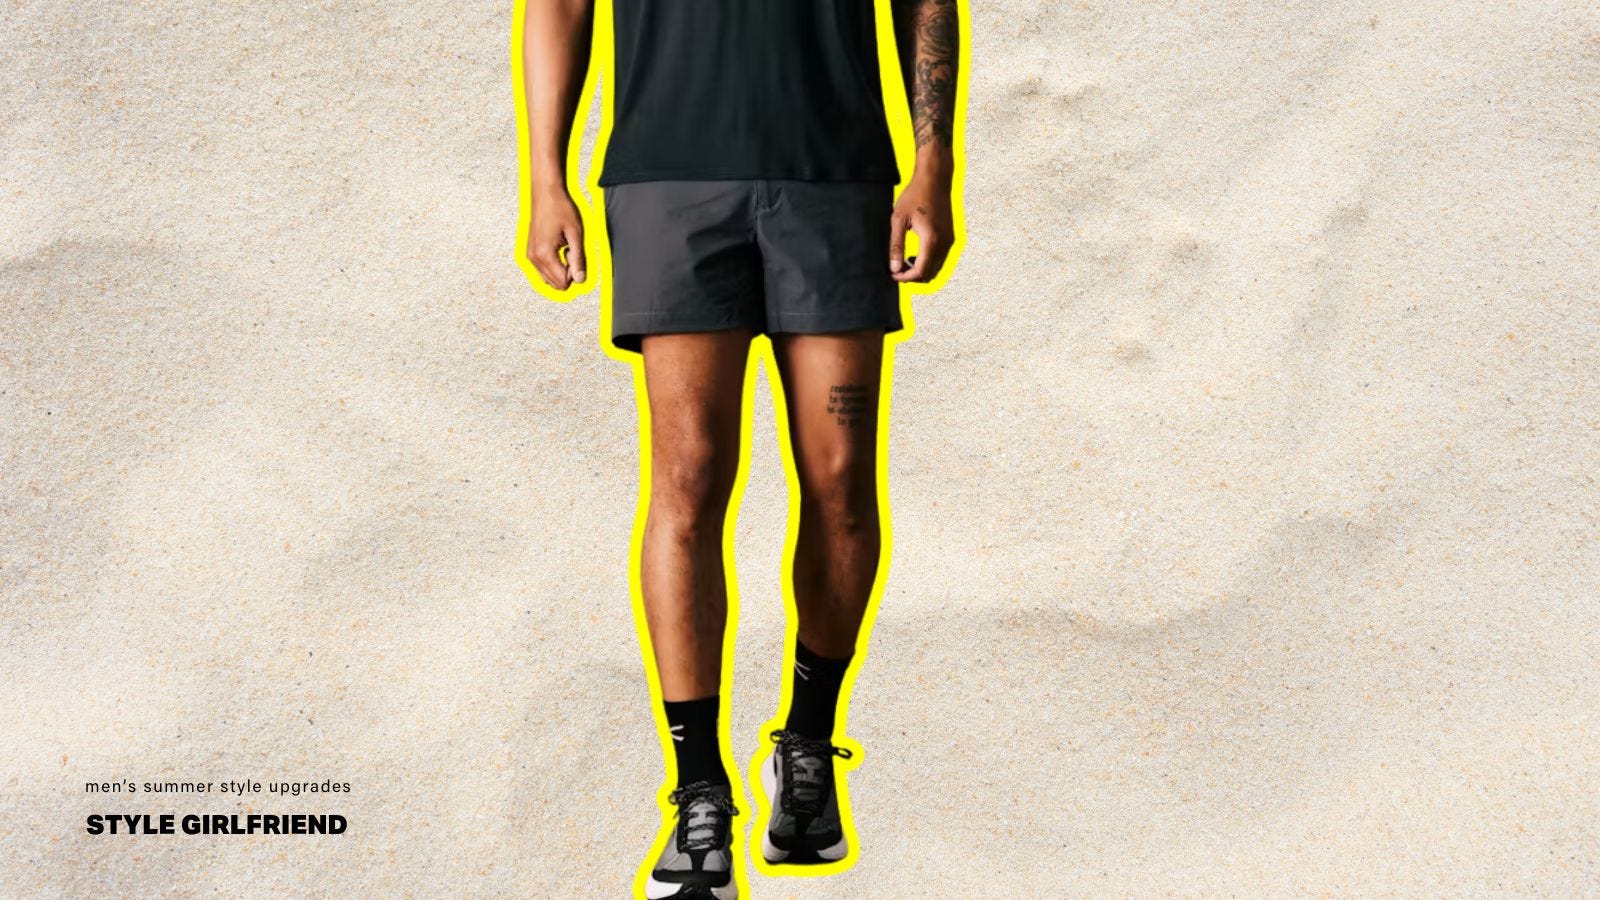 In the photo, a man is seen wearing a black T-shirt, gray mixed shorts and sneakers from the waist down.The text on the screen reads: Men’s Summer Style Upgrade